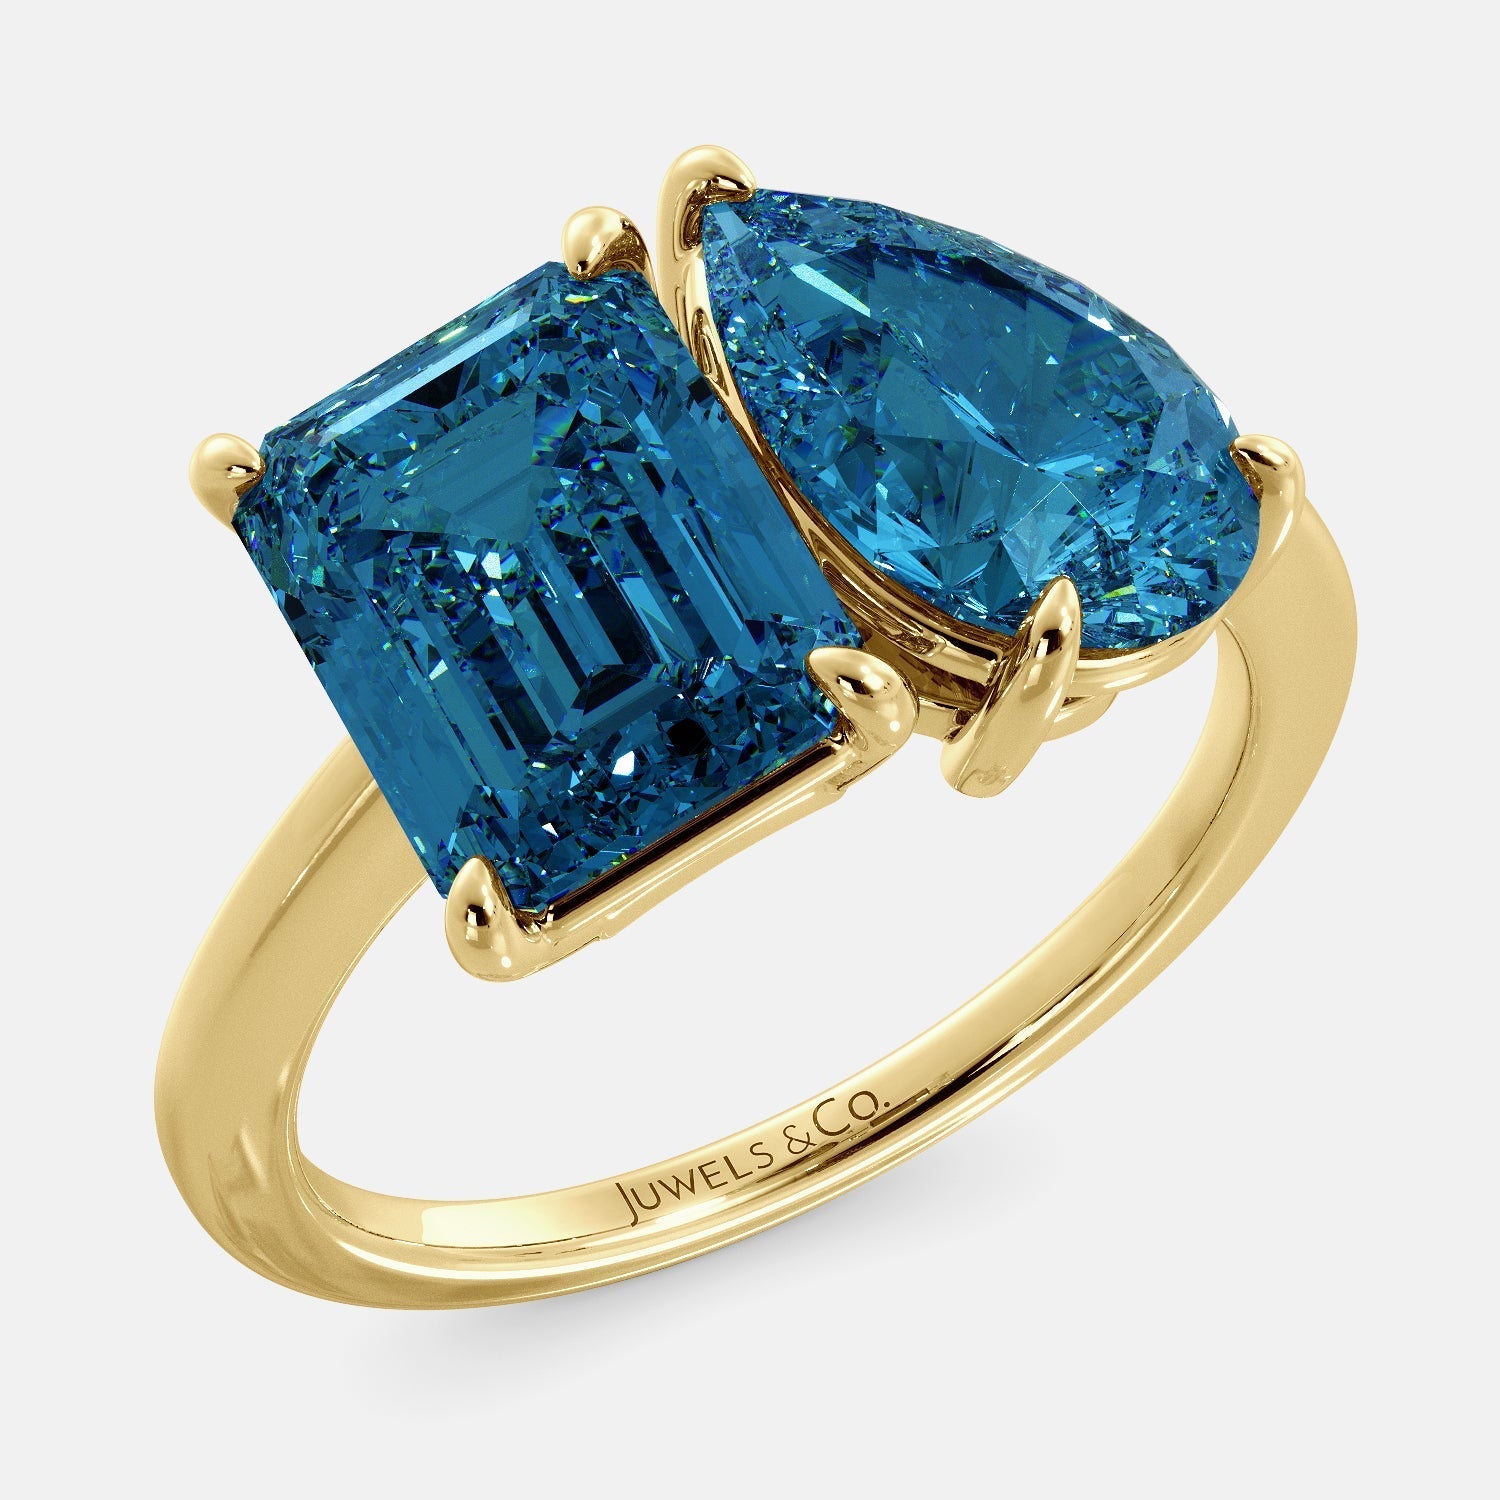 A toi et moi ring with two london blue topaz gemstones. The first gemstone is an emerald cut, and the second gemstone is a pear shape. The ring is made of 14k yellow gold and is set on a dainty band. The gemstones are sparkling in the light and are a beautiful and meaningful piece of jewelry.